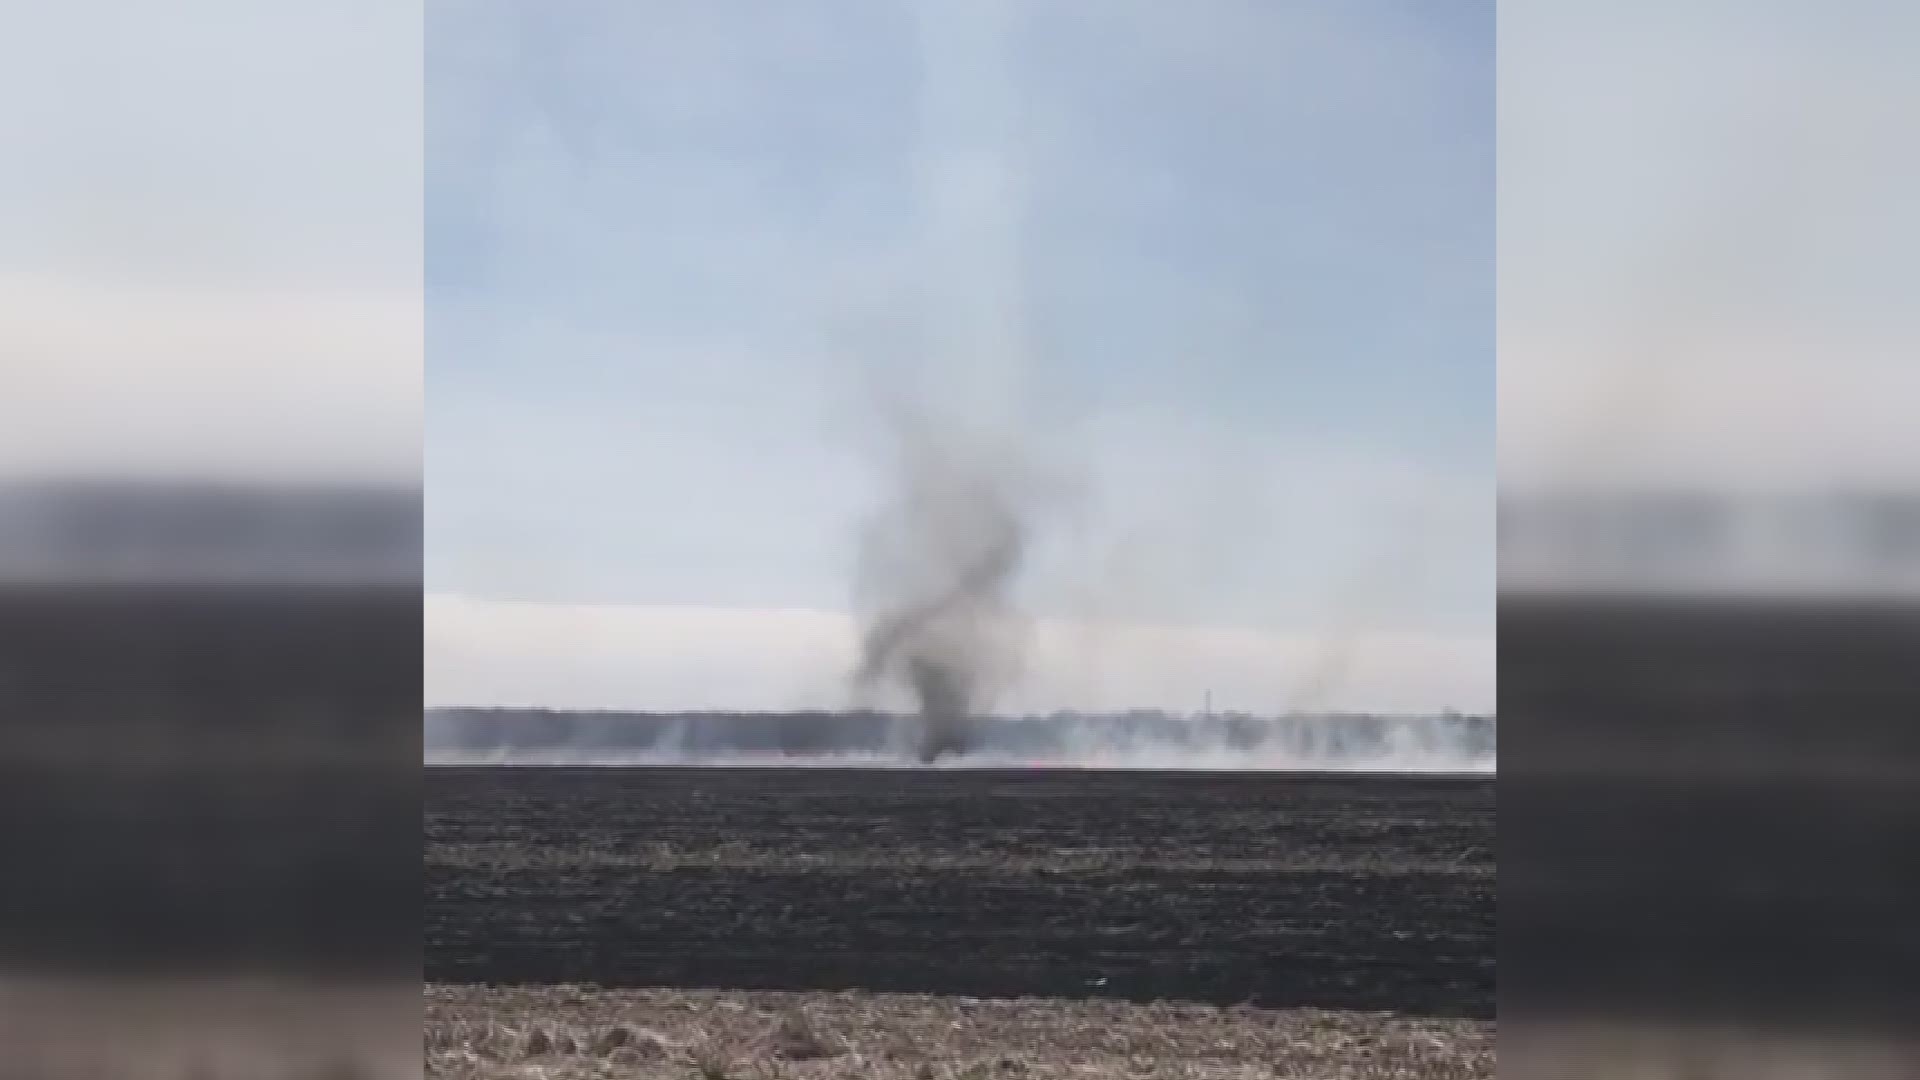 Cindy Jetton was in the right place this afternoon as a dust devil formed over a burning field near Newport, AR.  The temperature difference from the hot ground to the cooler air above and a breeze came together perfectly.

Video courtesy Cindy Jetton